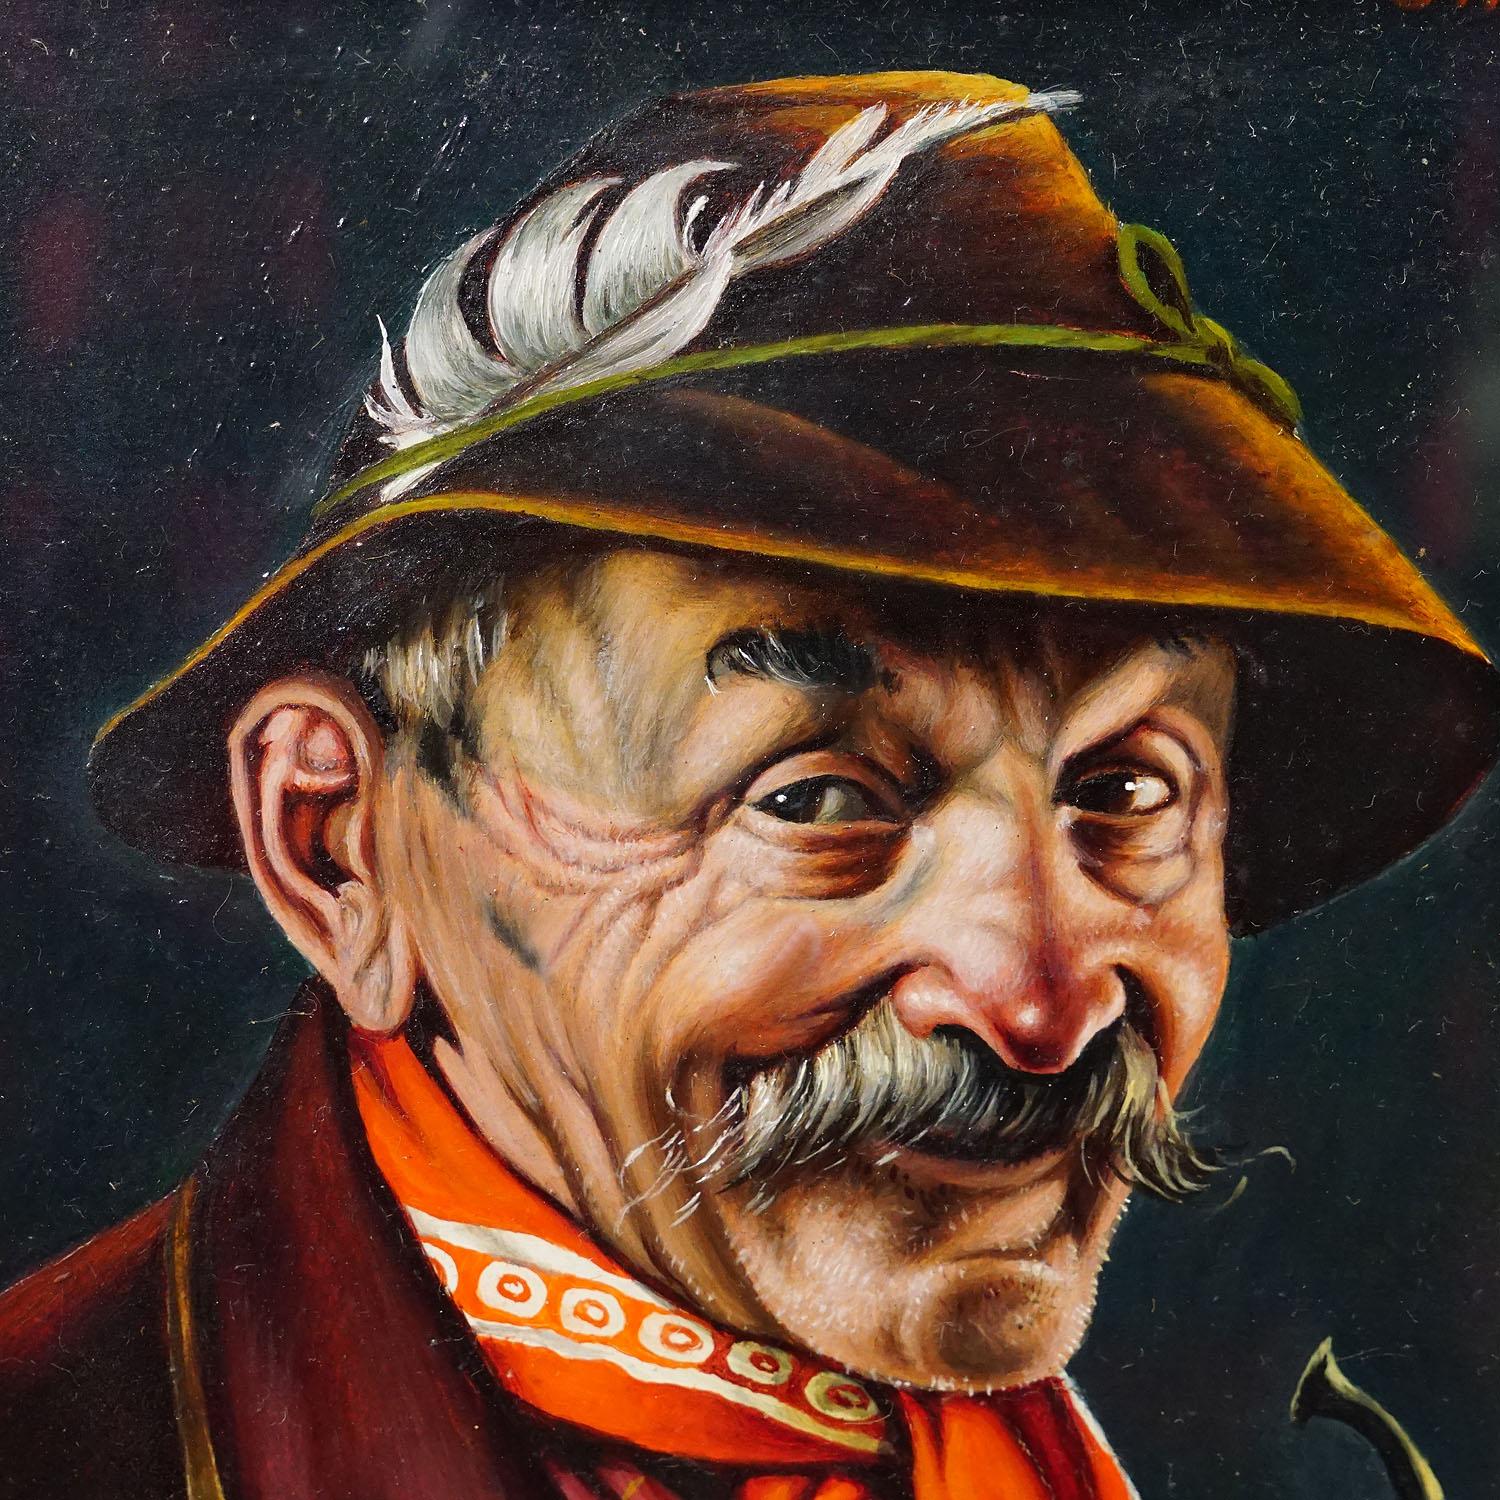 German Inge Woelfle - Portrait of a Bavarian Folksy Man with Pipe, Oil on Wood For Sale